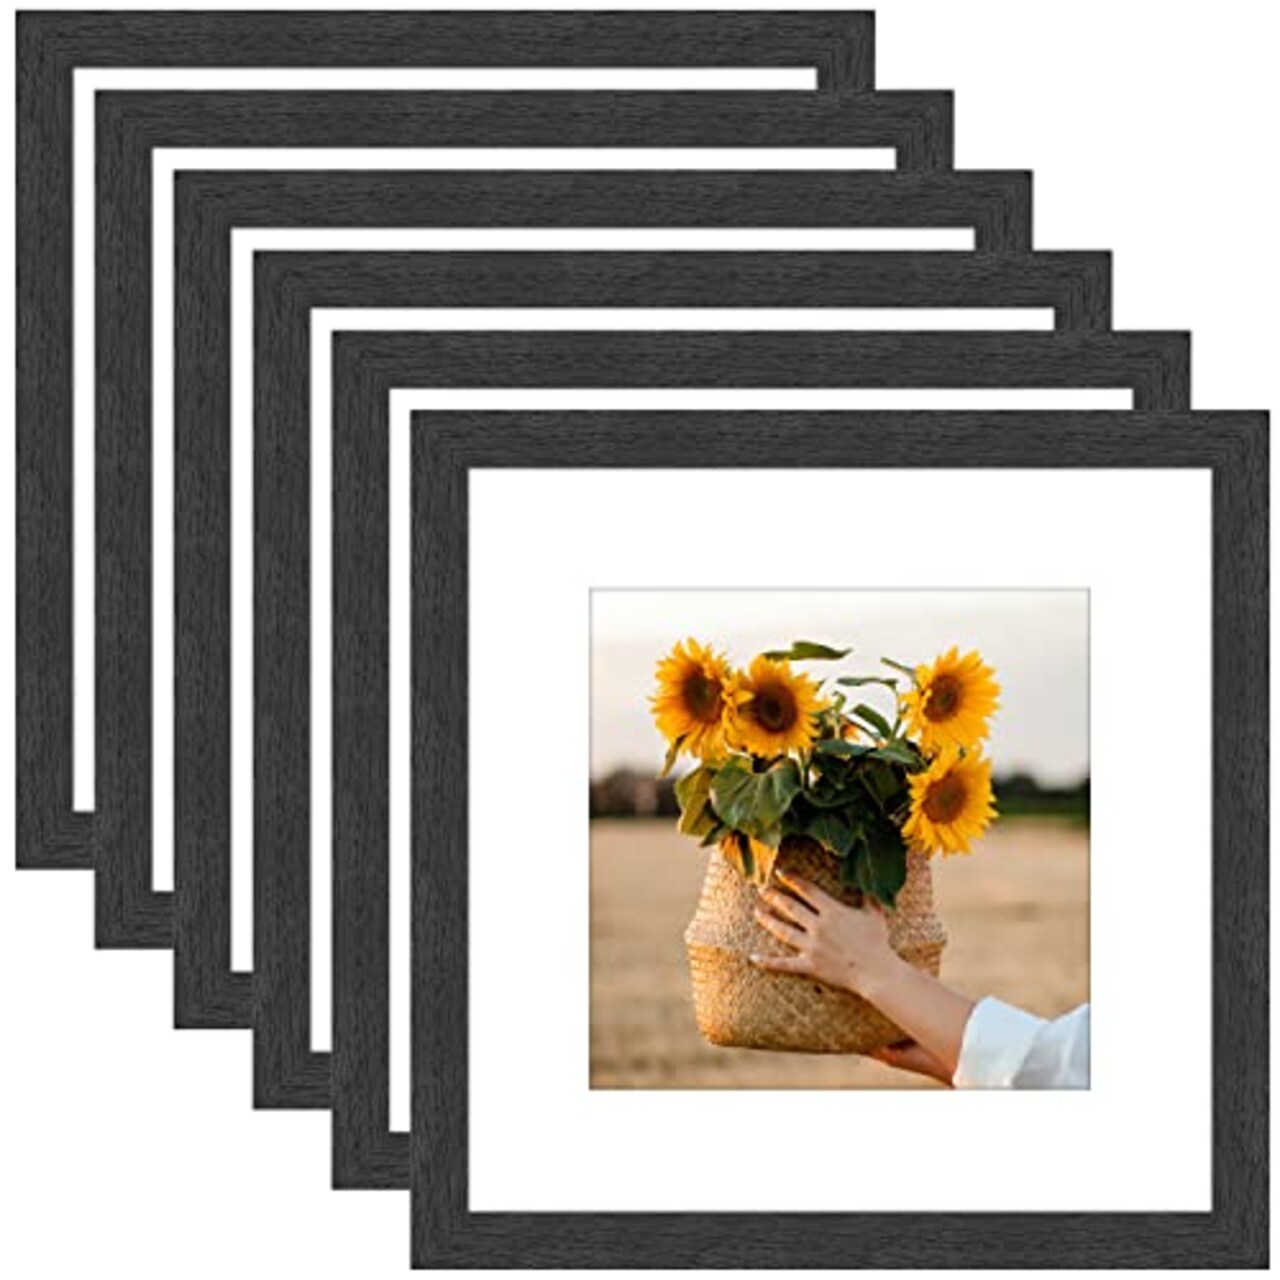 VMUZEDER 8x8 Picture Frame Rustic Black Wood Set of 6,Display Pictures 5x5  with Mat or 8x8 Without Mat,Multi Photo Frames Collage for Wall or Tabletop  Display